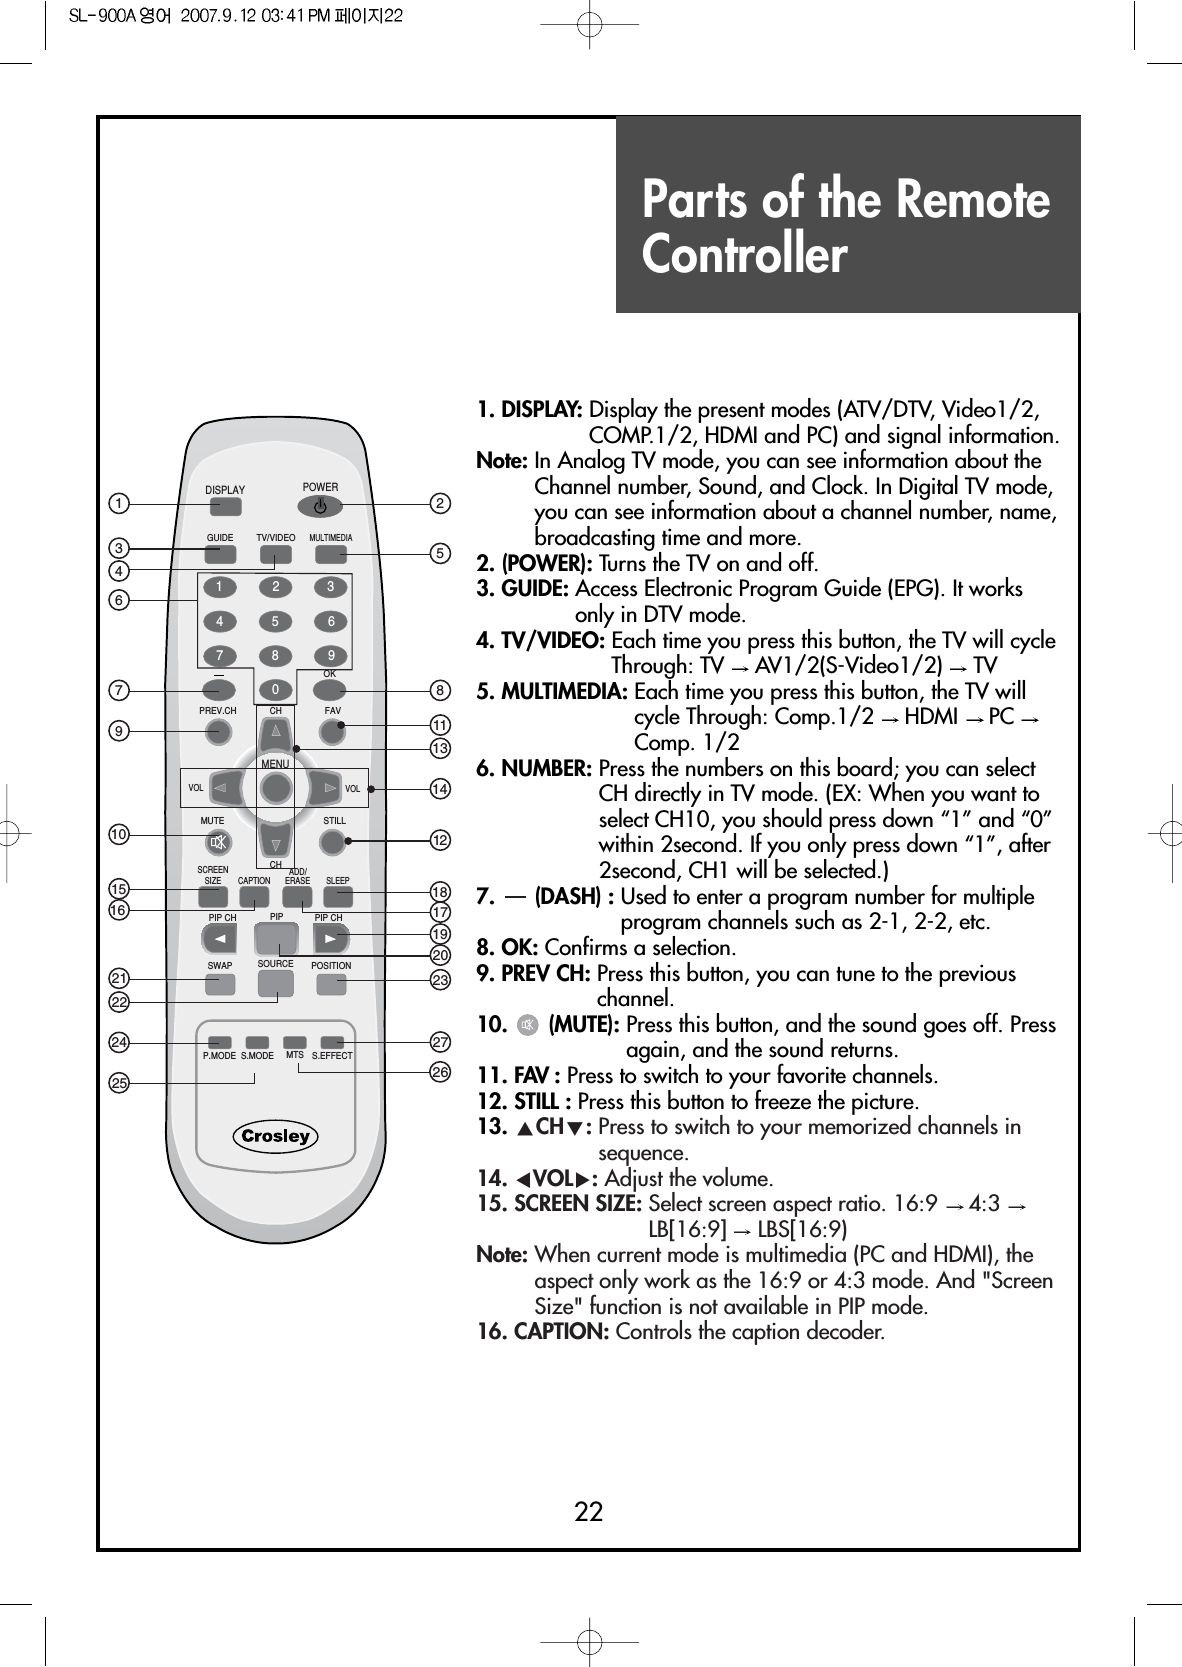 Parts of the RemoteController221. DISPLAY: Display the present modes (ATV/DTV, Video1/2,COMP.1/2, HDMI and PC) and signal information.Note: In Analog TV mode, you can see information about theChannel number, Sound, and Clock. In Digital TV mode,you can see information about a channel number, name,broadcasting time and more.2. (POWER): Turns the TV on and off.3. GUIDE: Access Electronic Program Guide (EPG). It worksonly in DTV mode.4. TV/VIDEO: Each time you press this button, the TV will cycleThrough: TV  AV1/2(S-Video1/2)  TV5. MULTIMEDIA: Each time you press this button, the TV willcycle Through: Comp.1/2  HDMI  PC Comp. 1/26. NUMBER: Press the numbers on this board; you can selectCH directly in TV mode. (EX: When you want toselect CH10, you should press down “1” and “0”within 2second. If you only press down “1”, after2second, CH1 will be selected.)7. (DASH) : Used to enter a program number for multipleprogram channels such as 2-1, 2-2, etc.8. OK: Confirms a selection.9. PREV CH: Press this button, you can tune to the previouschannel.10. (MUTE): Press this button, and the sound goes off. Pressagain, and the sound returns.11. FAV : Press to switch to your favorite channels.12. STILL : Press this button to freeze the picture.13. VCHW: Press to switch to your memorized channels insequence.14. CVOLB:Adjust the volume.15. SCREEN SIZE: Select screen aspect ratio. 16:9  4:3 LB[16:9]  LBS[16:9)Note: When current mode is multimedia (PC and HDMI), theaspect only work as the 16:9 or 4:3 mode. And &quot;ScreenSize&quot; function is not available in PIP mode.16. CAPTION: Controls the caption decoder.DISPLAYMENUGUIDE TV/VIDEOFAVPREV.CHMUTESCREENSIZE CAPTIONPIP CH PIP CHPIPSWAPP.MODE S.MODE S.EFFECTMTSSOURCE POSITIONSLEEPVOL VOLCHCHMULTIMEDIAOKPOWER1234567809STILLADD/ERASE136791021152416252242581314121118231927172620